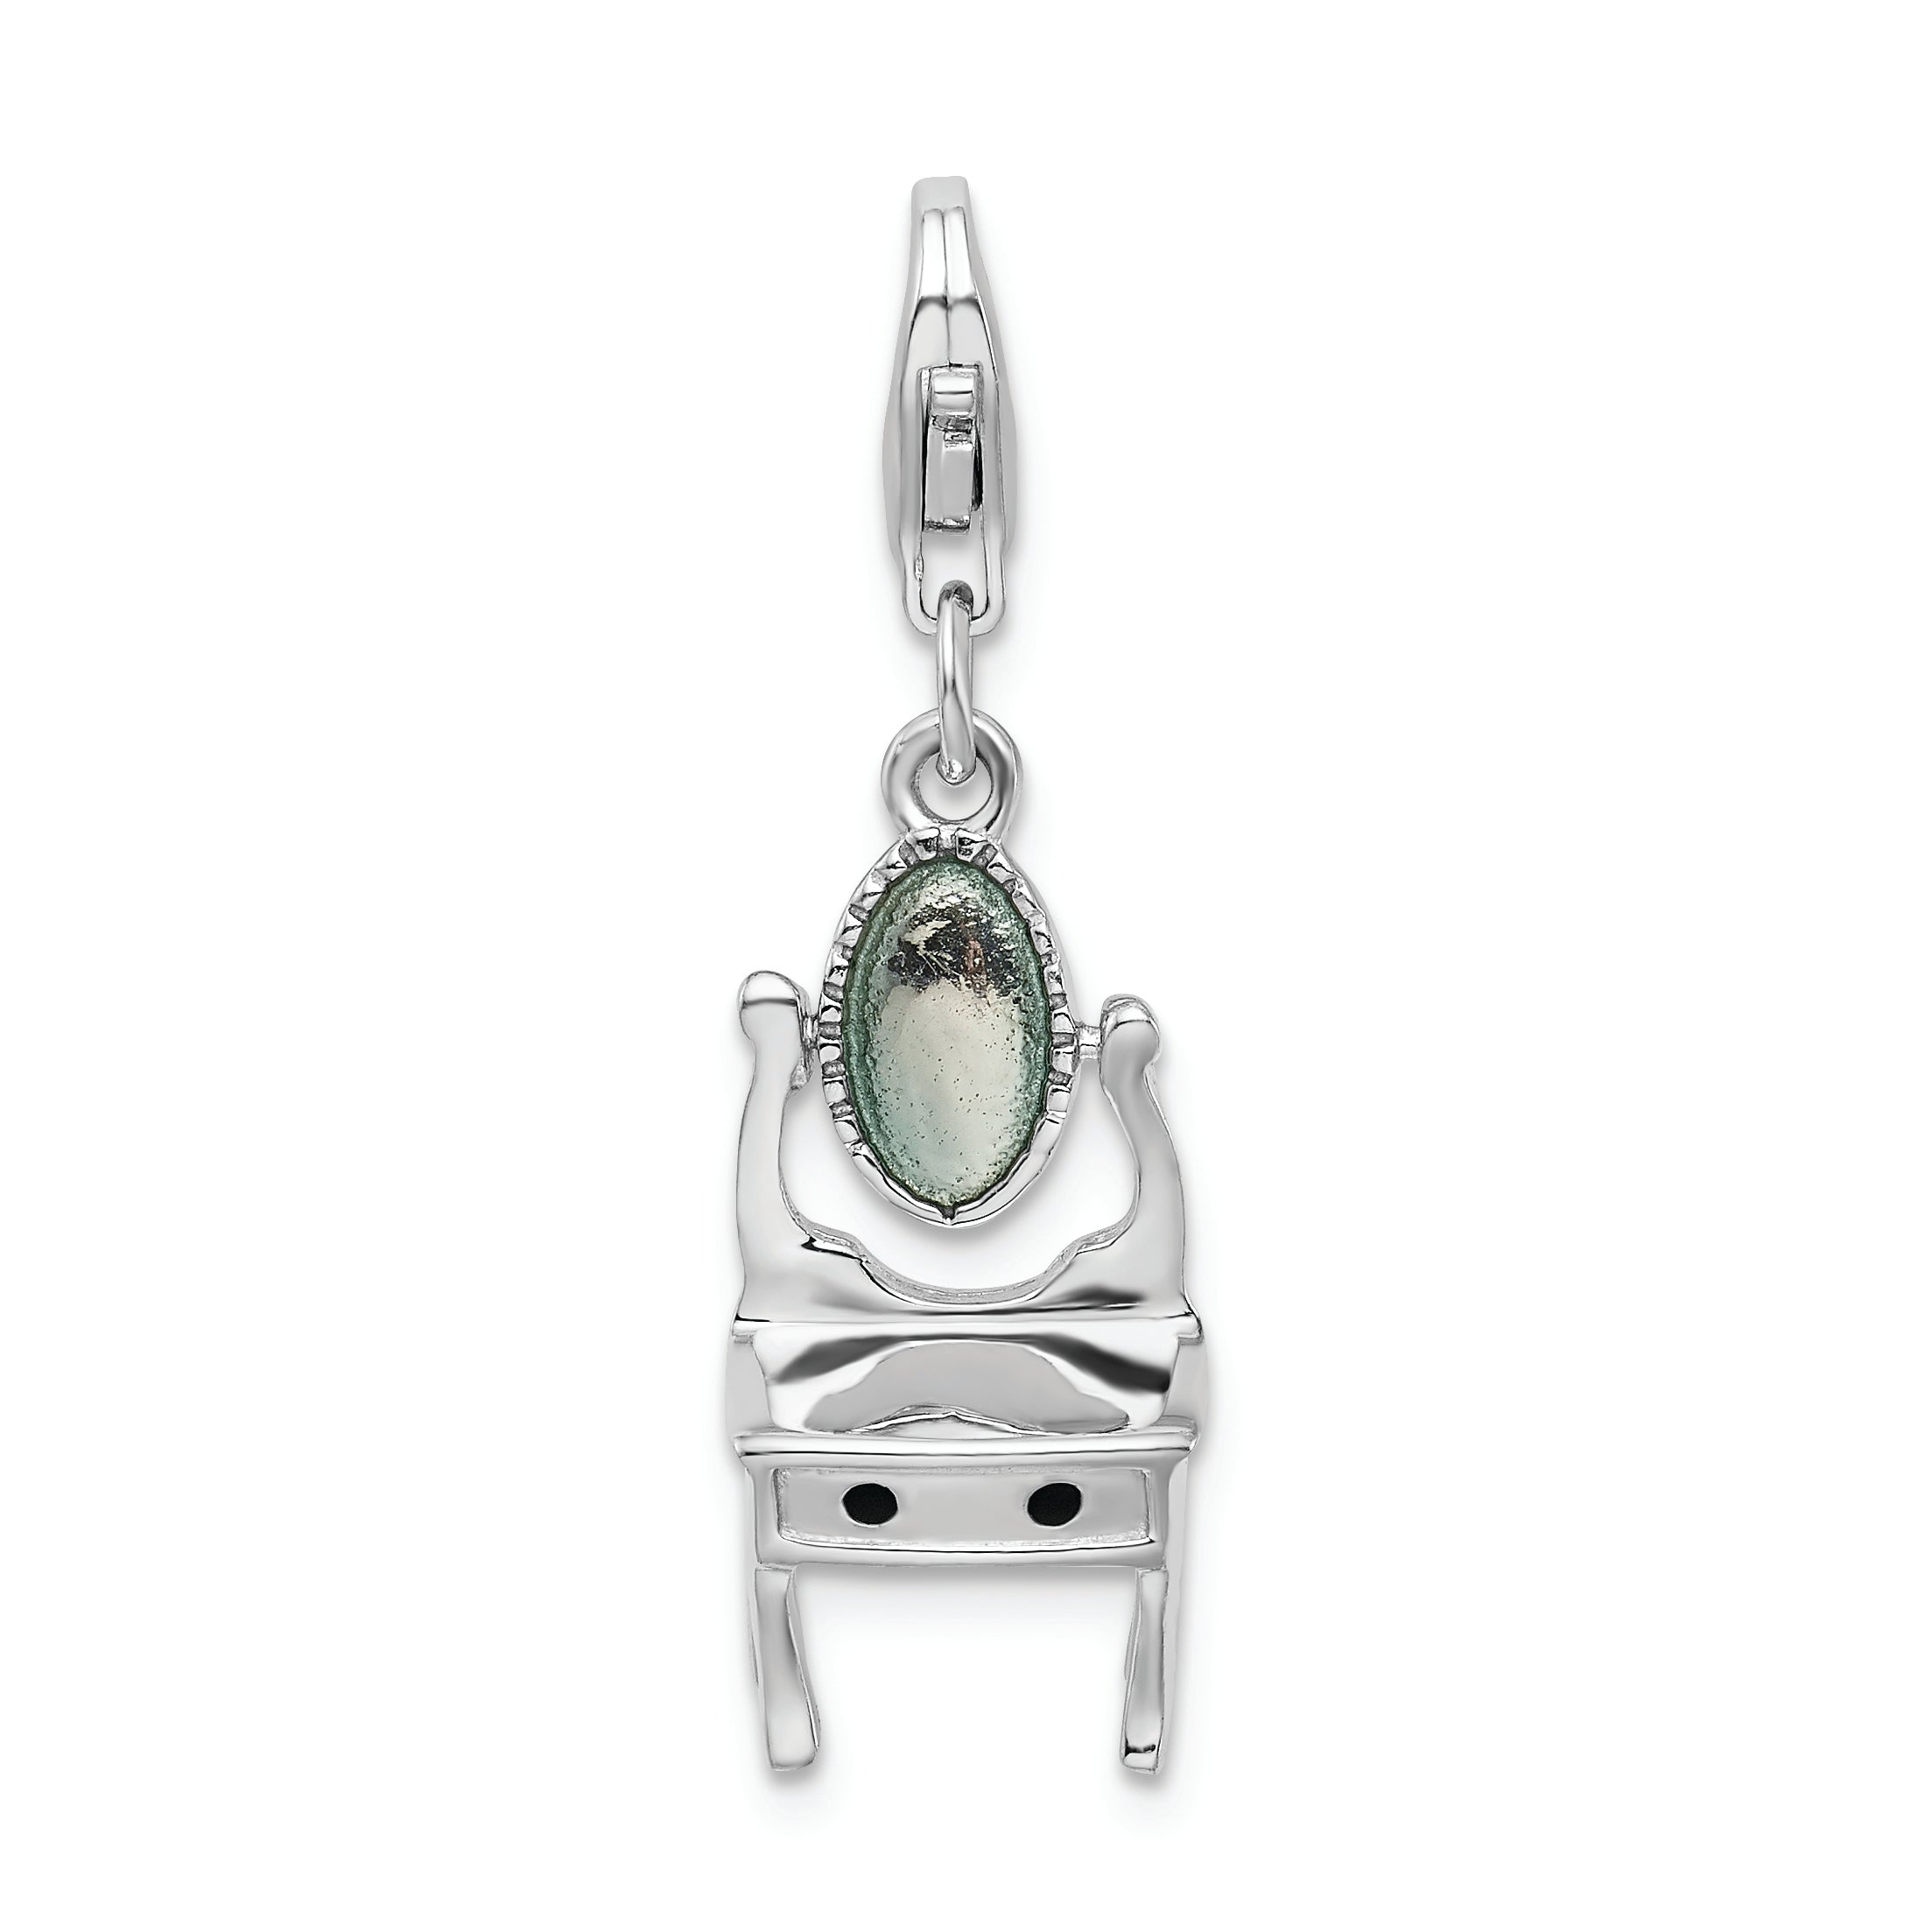 Amore La Vita Sterling Silver Rhodium-plated 3-D Polished Enameled Vanity Charm with Fancy Lobster Clasp